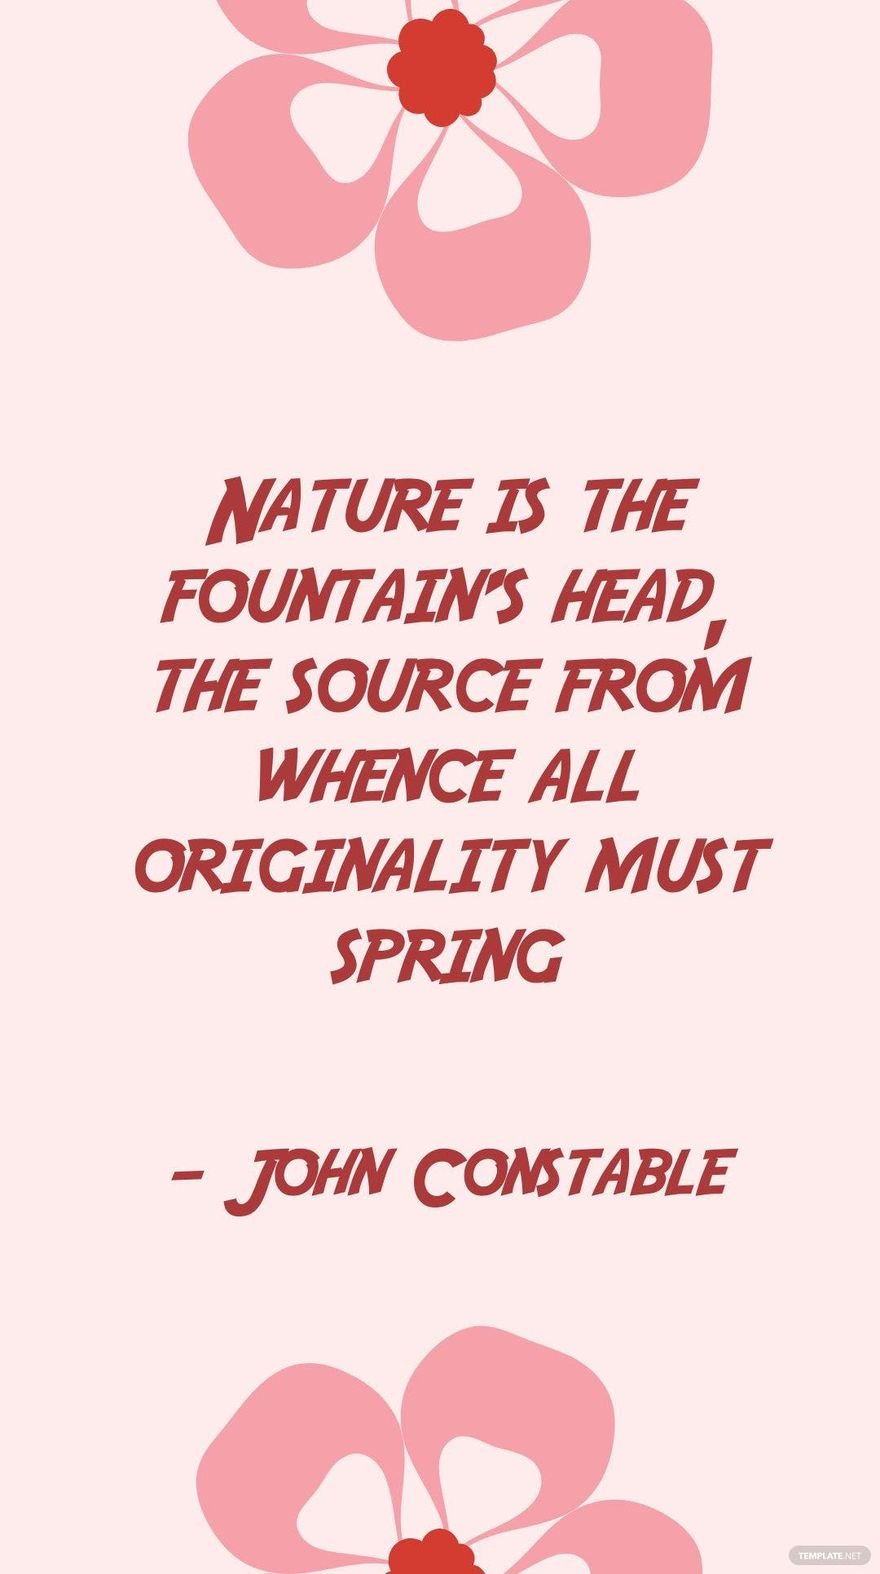 Free John Constable - Nature is the fountain's head, the source from whence all originality must spring in JPG